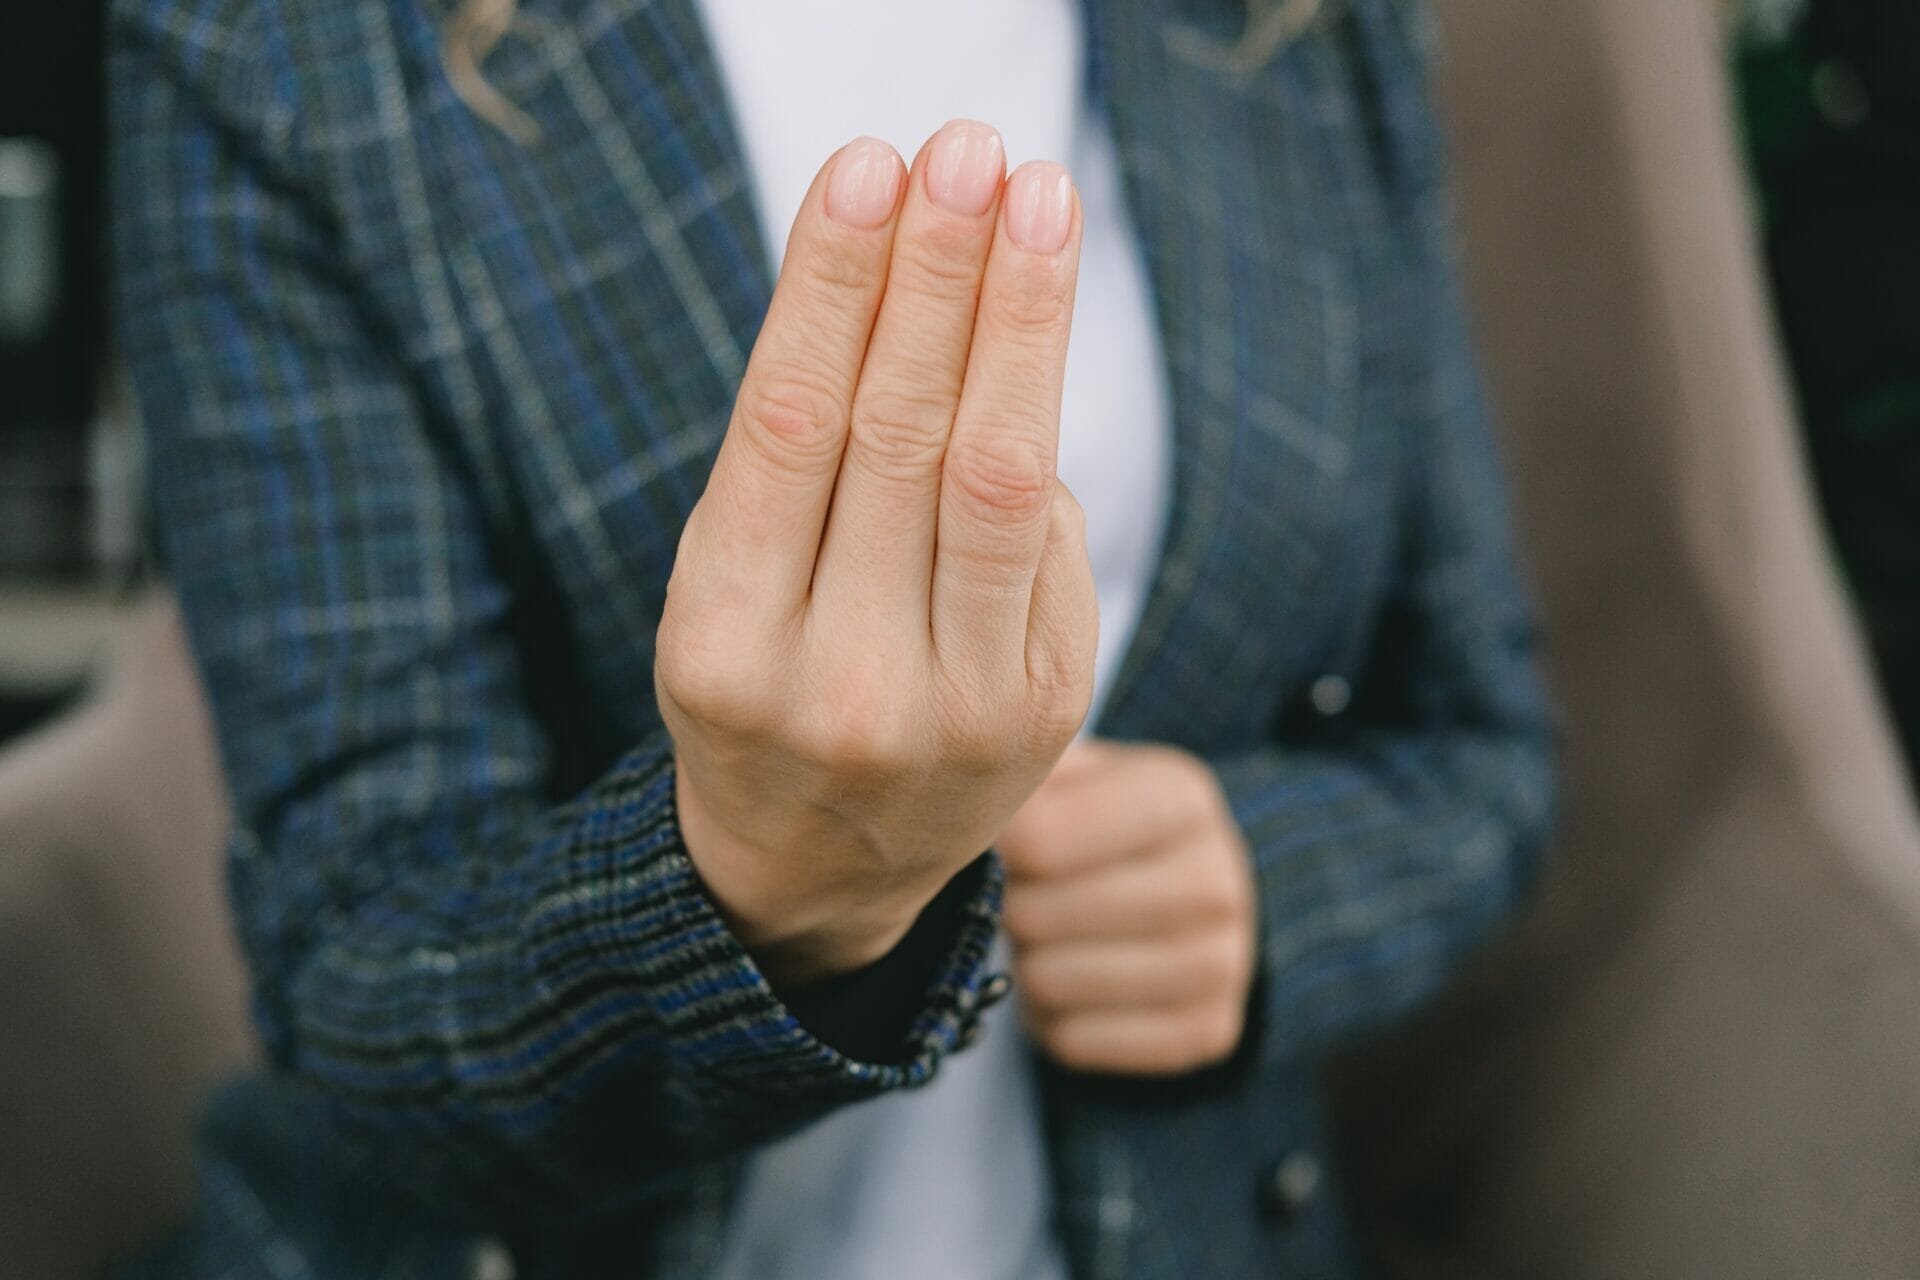 Image depicting various types of body language: A woman standing, using hand gestures to convey messages.